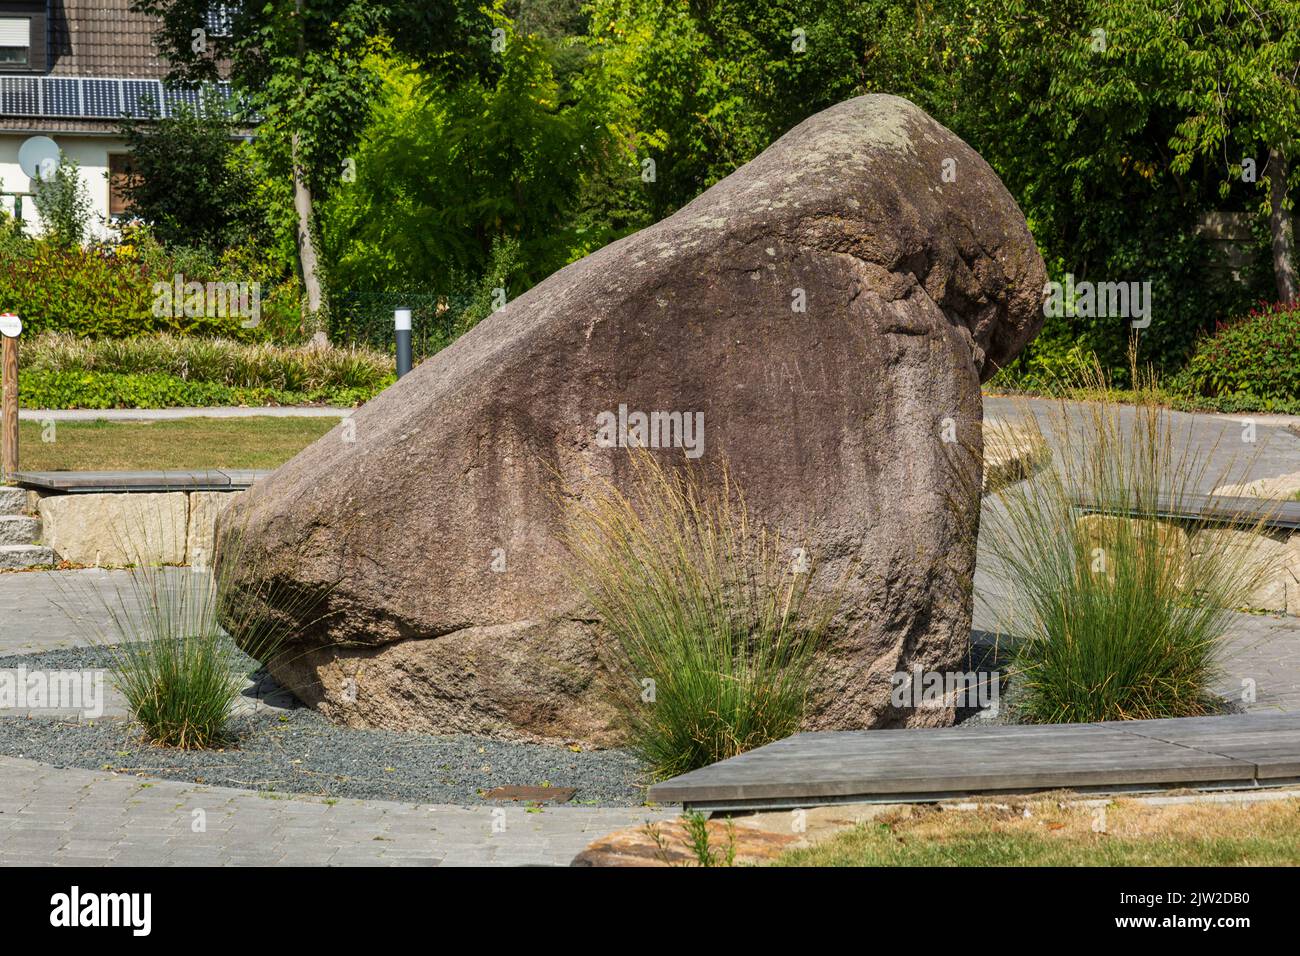 Germany, Rosendahl, Baumberge, Westmuensterland, Muensterland, Westphalia, North Rhine-Westphalia, NRW, Rosendahl-Holtwick, The Holtwick Egg, natural benchmark, the erratic boulder from the glacial period came from Sweden Stock Photo